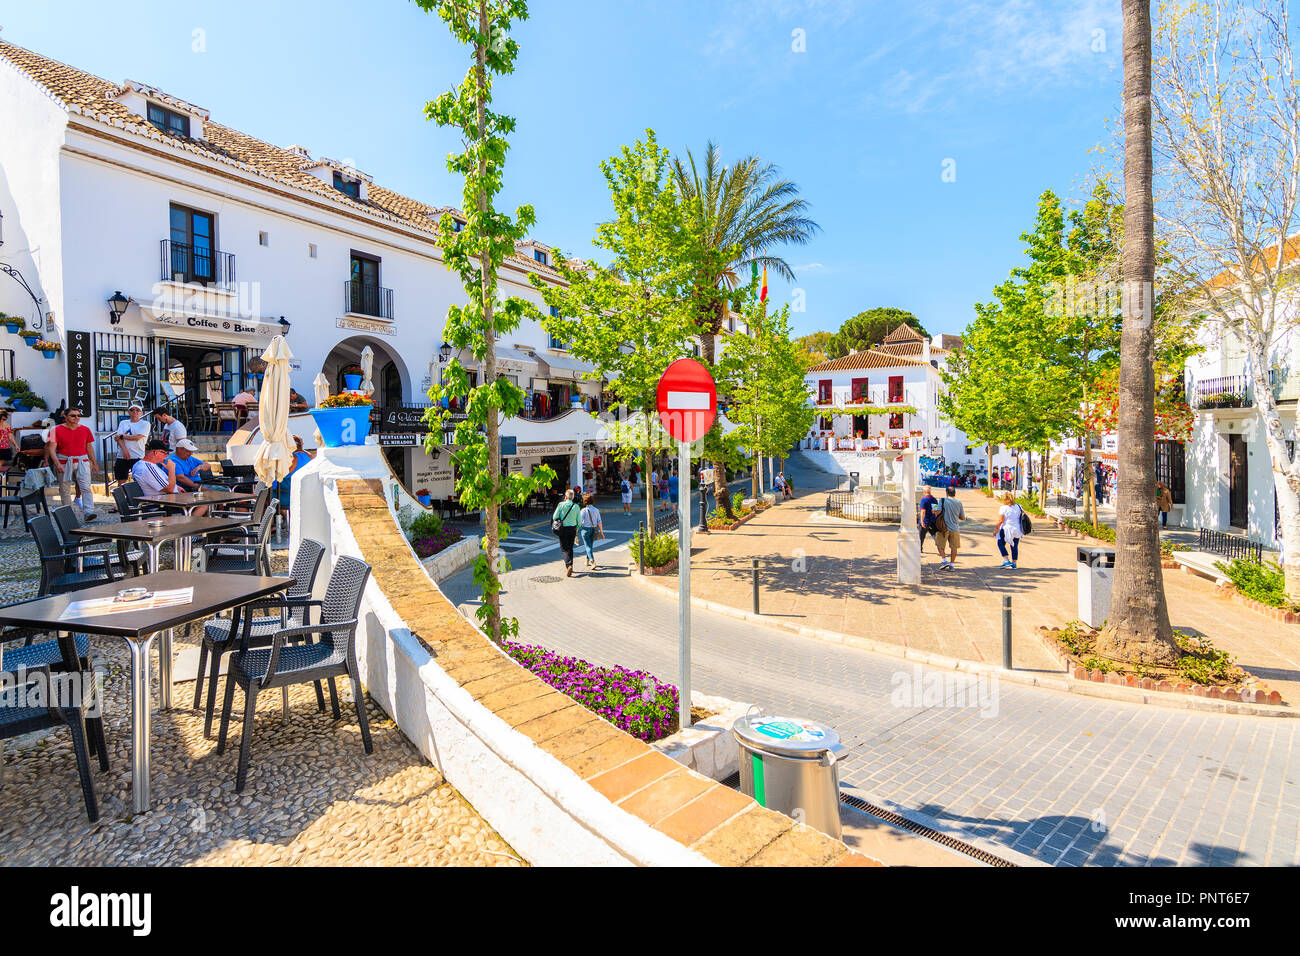 MIJAS TOWN, SPAIN - MAY 9, 2018: Beautiful buildings in picturesque village of Mijas famous for white typical architecture of Andalusia. Spain is seco Stock Photo